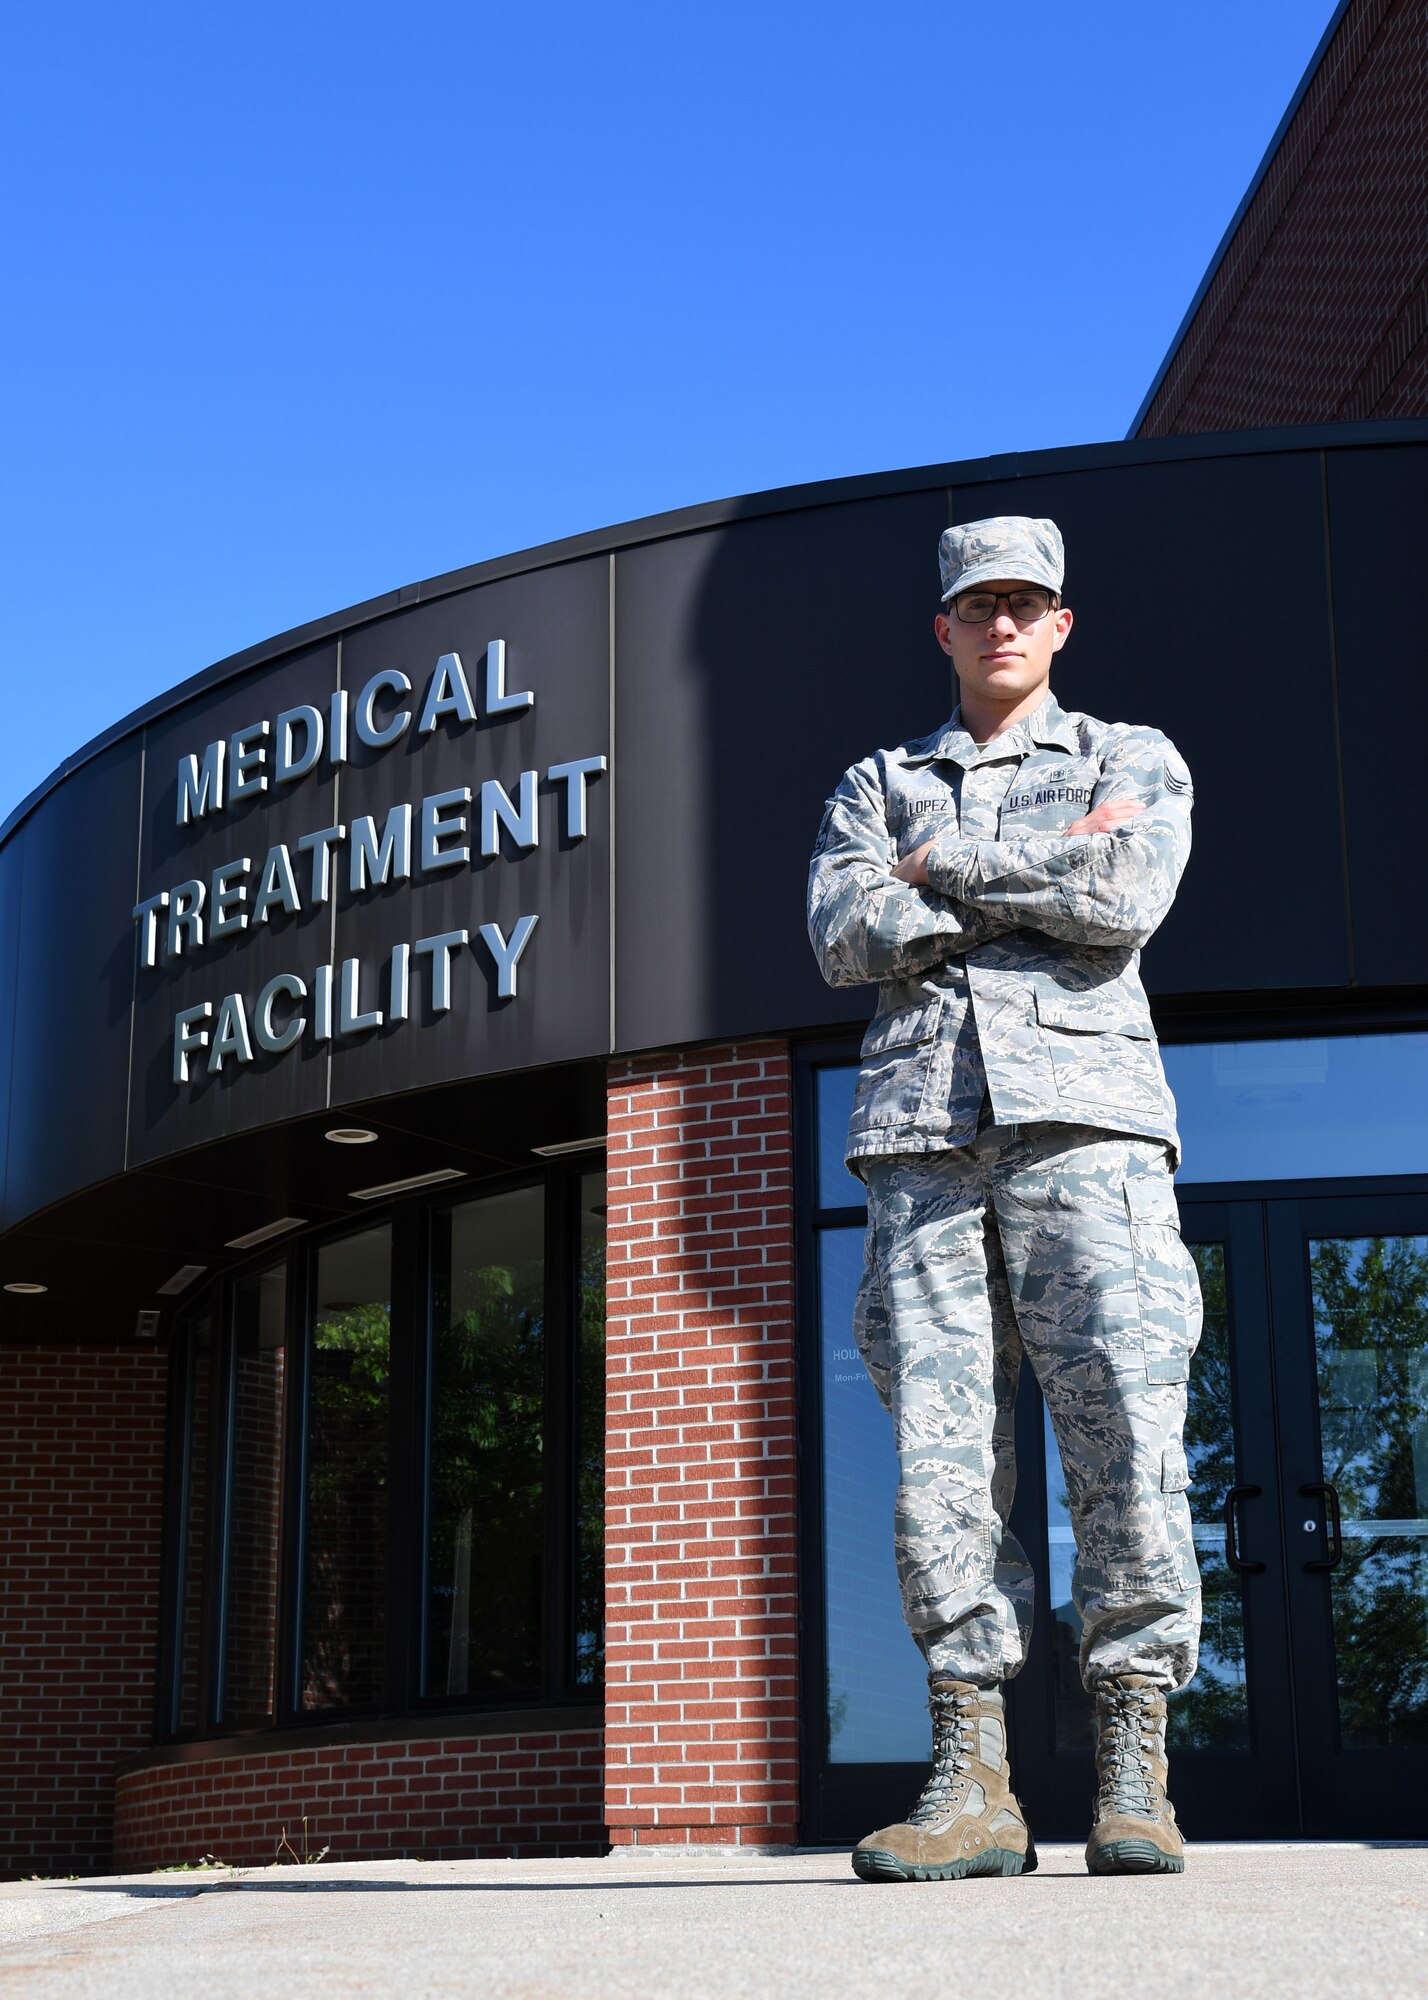 Senior Airman Alexis Lopez, dental assistant with the 319th Medical Group, currently works at the medical treatment facility on Grand Forks Air Force Base, N.D. He previously was stationed at Oshawa Air Base, Japan, and hopes to cross-train to become a pararescueman.